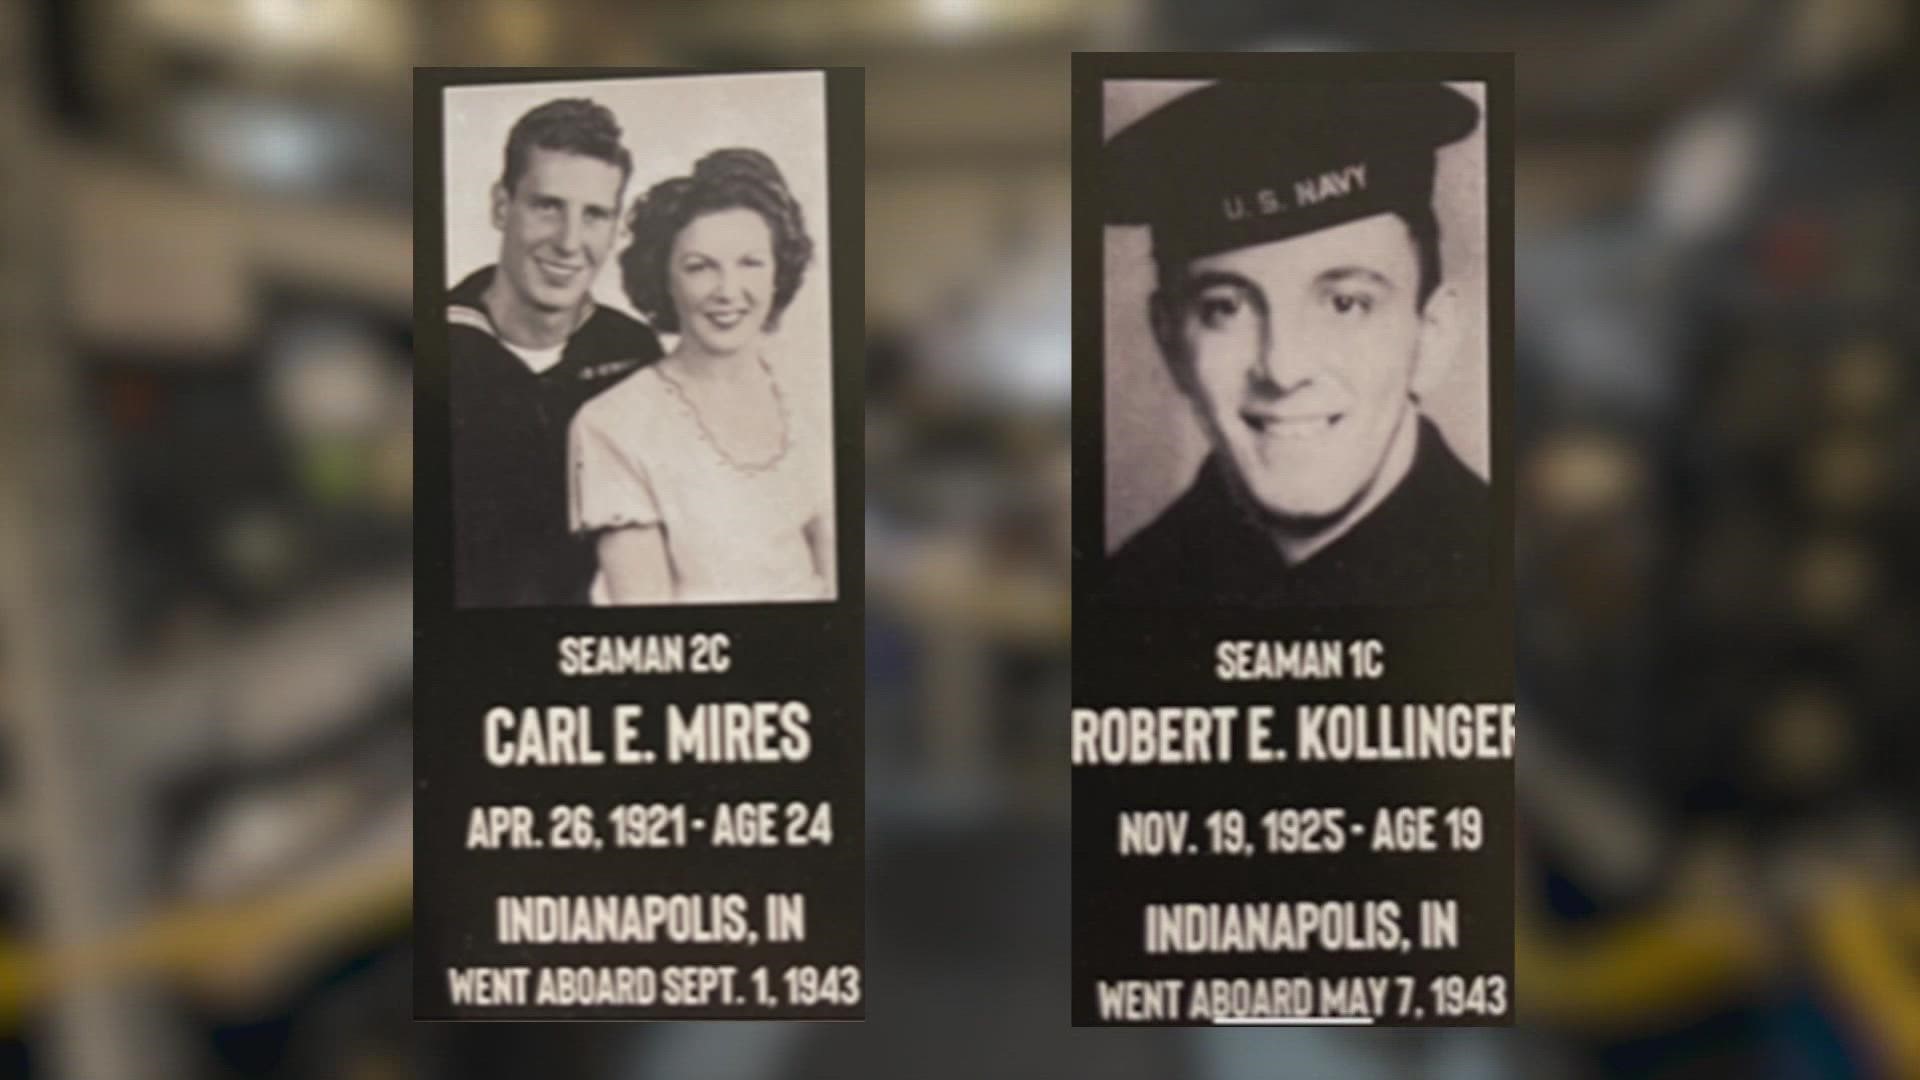 A quest is underway right now to compile the stories of Hoosier heroes lost at sea during World War 2.